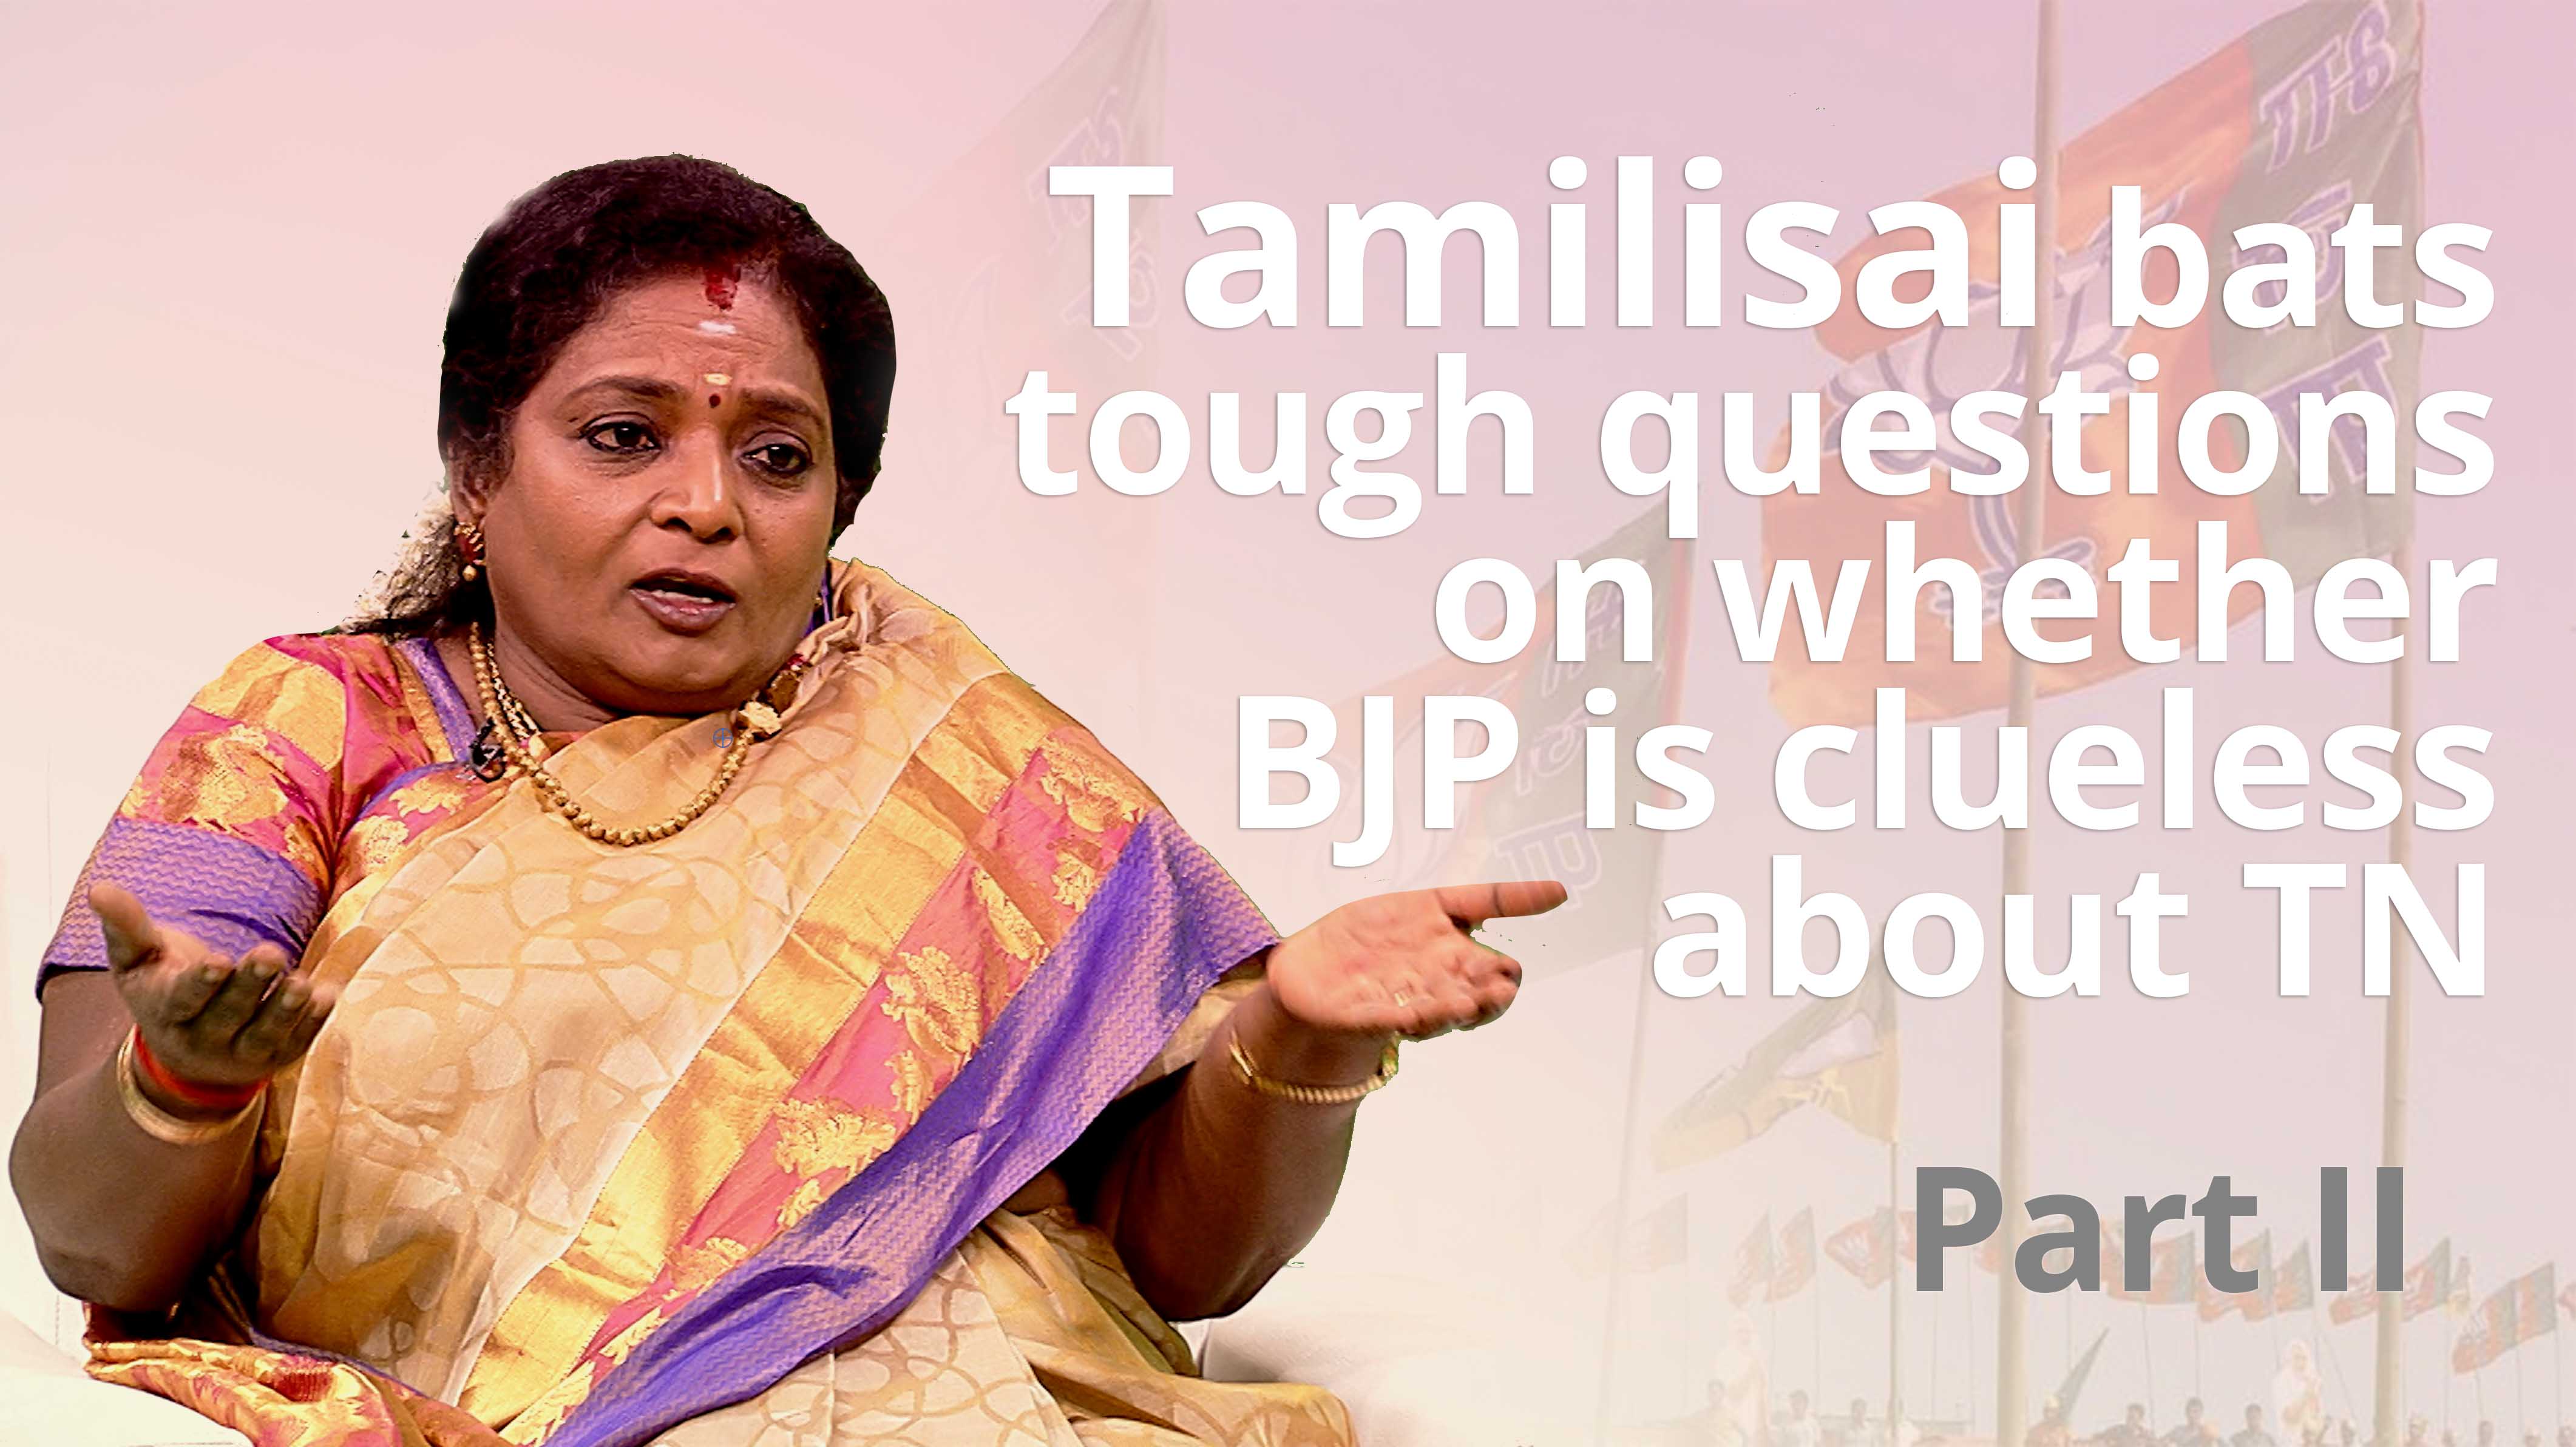 Part 2 | Tamilisai bats tough questions on whether BJP is clueless about TN